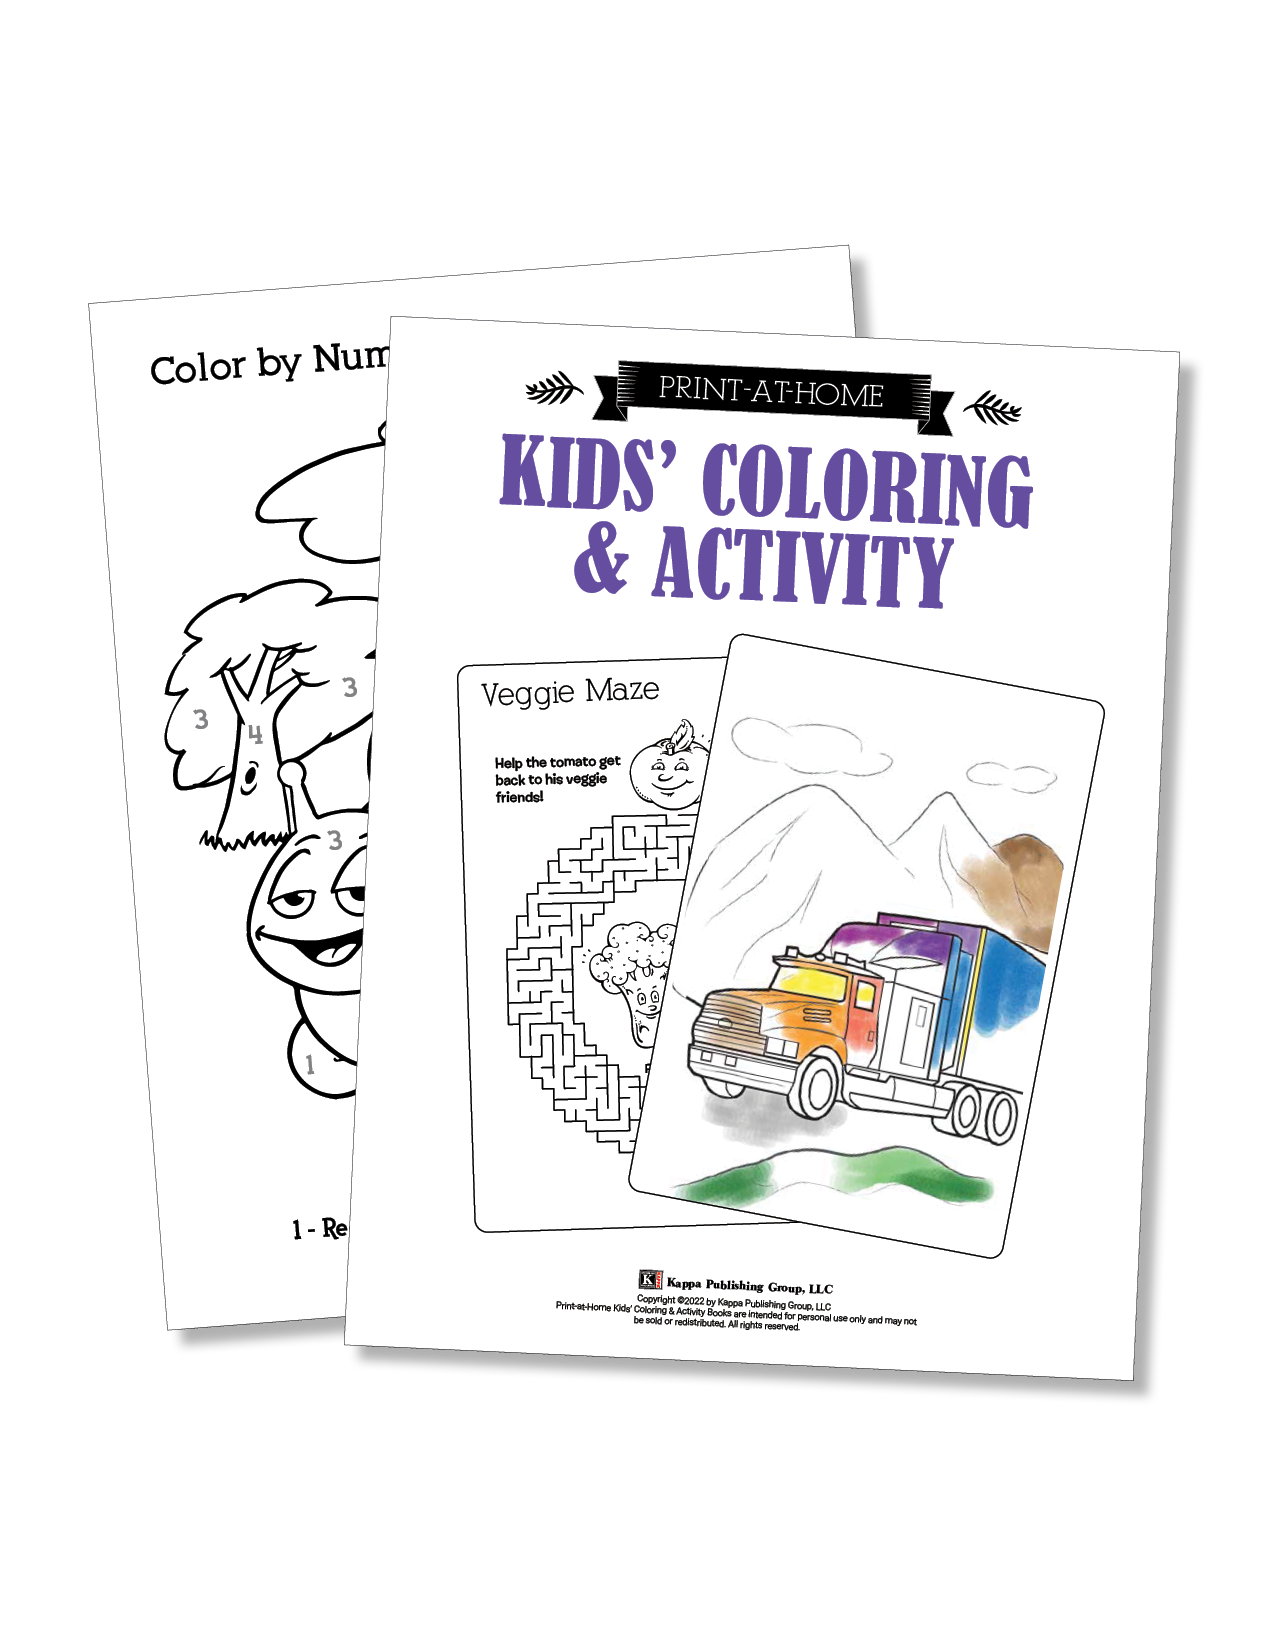 Assorted Adult Coloring Pages - Set of 5, Instant Download